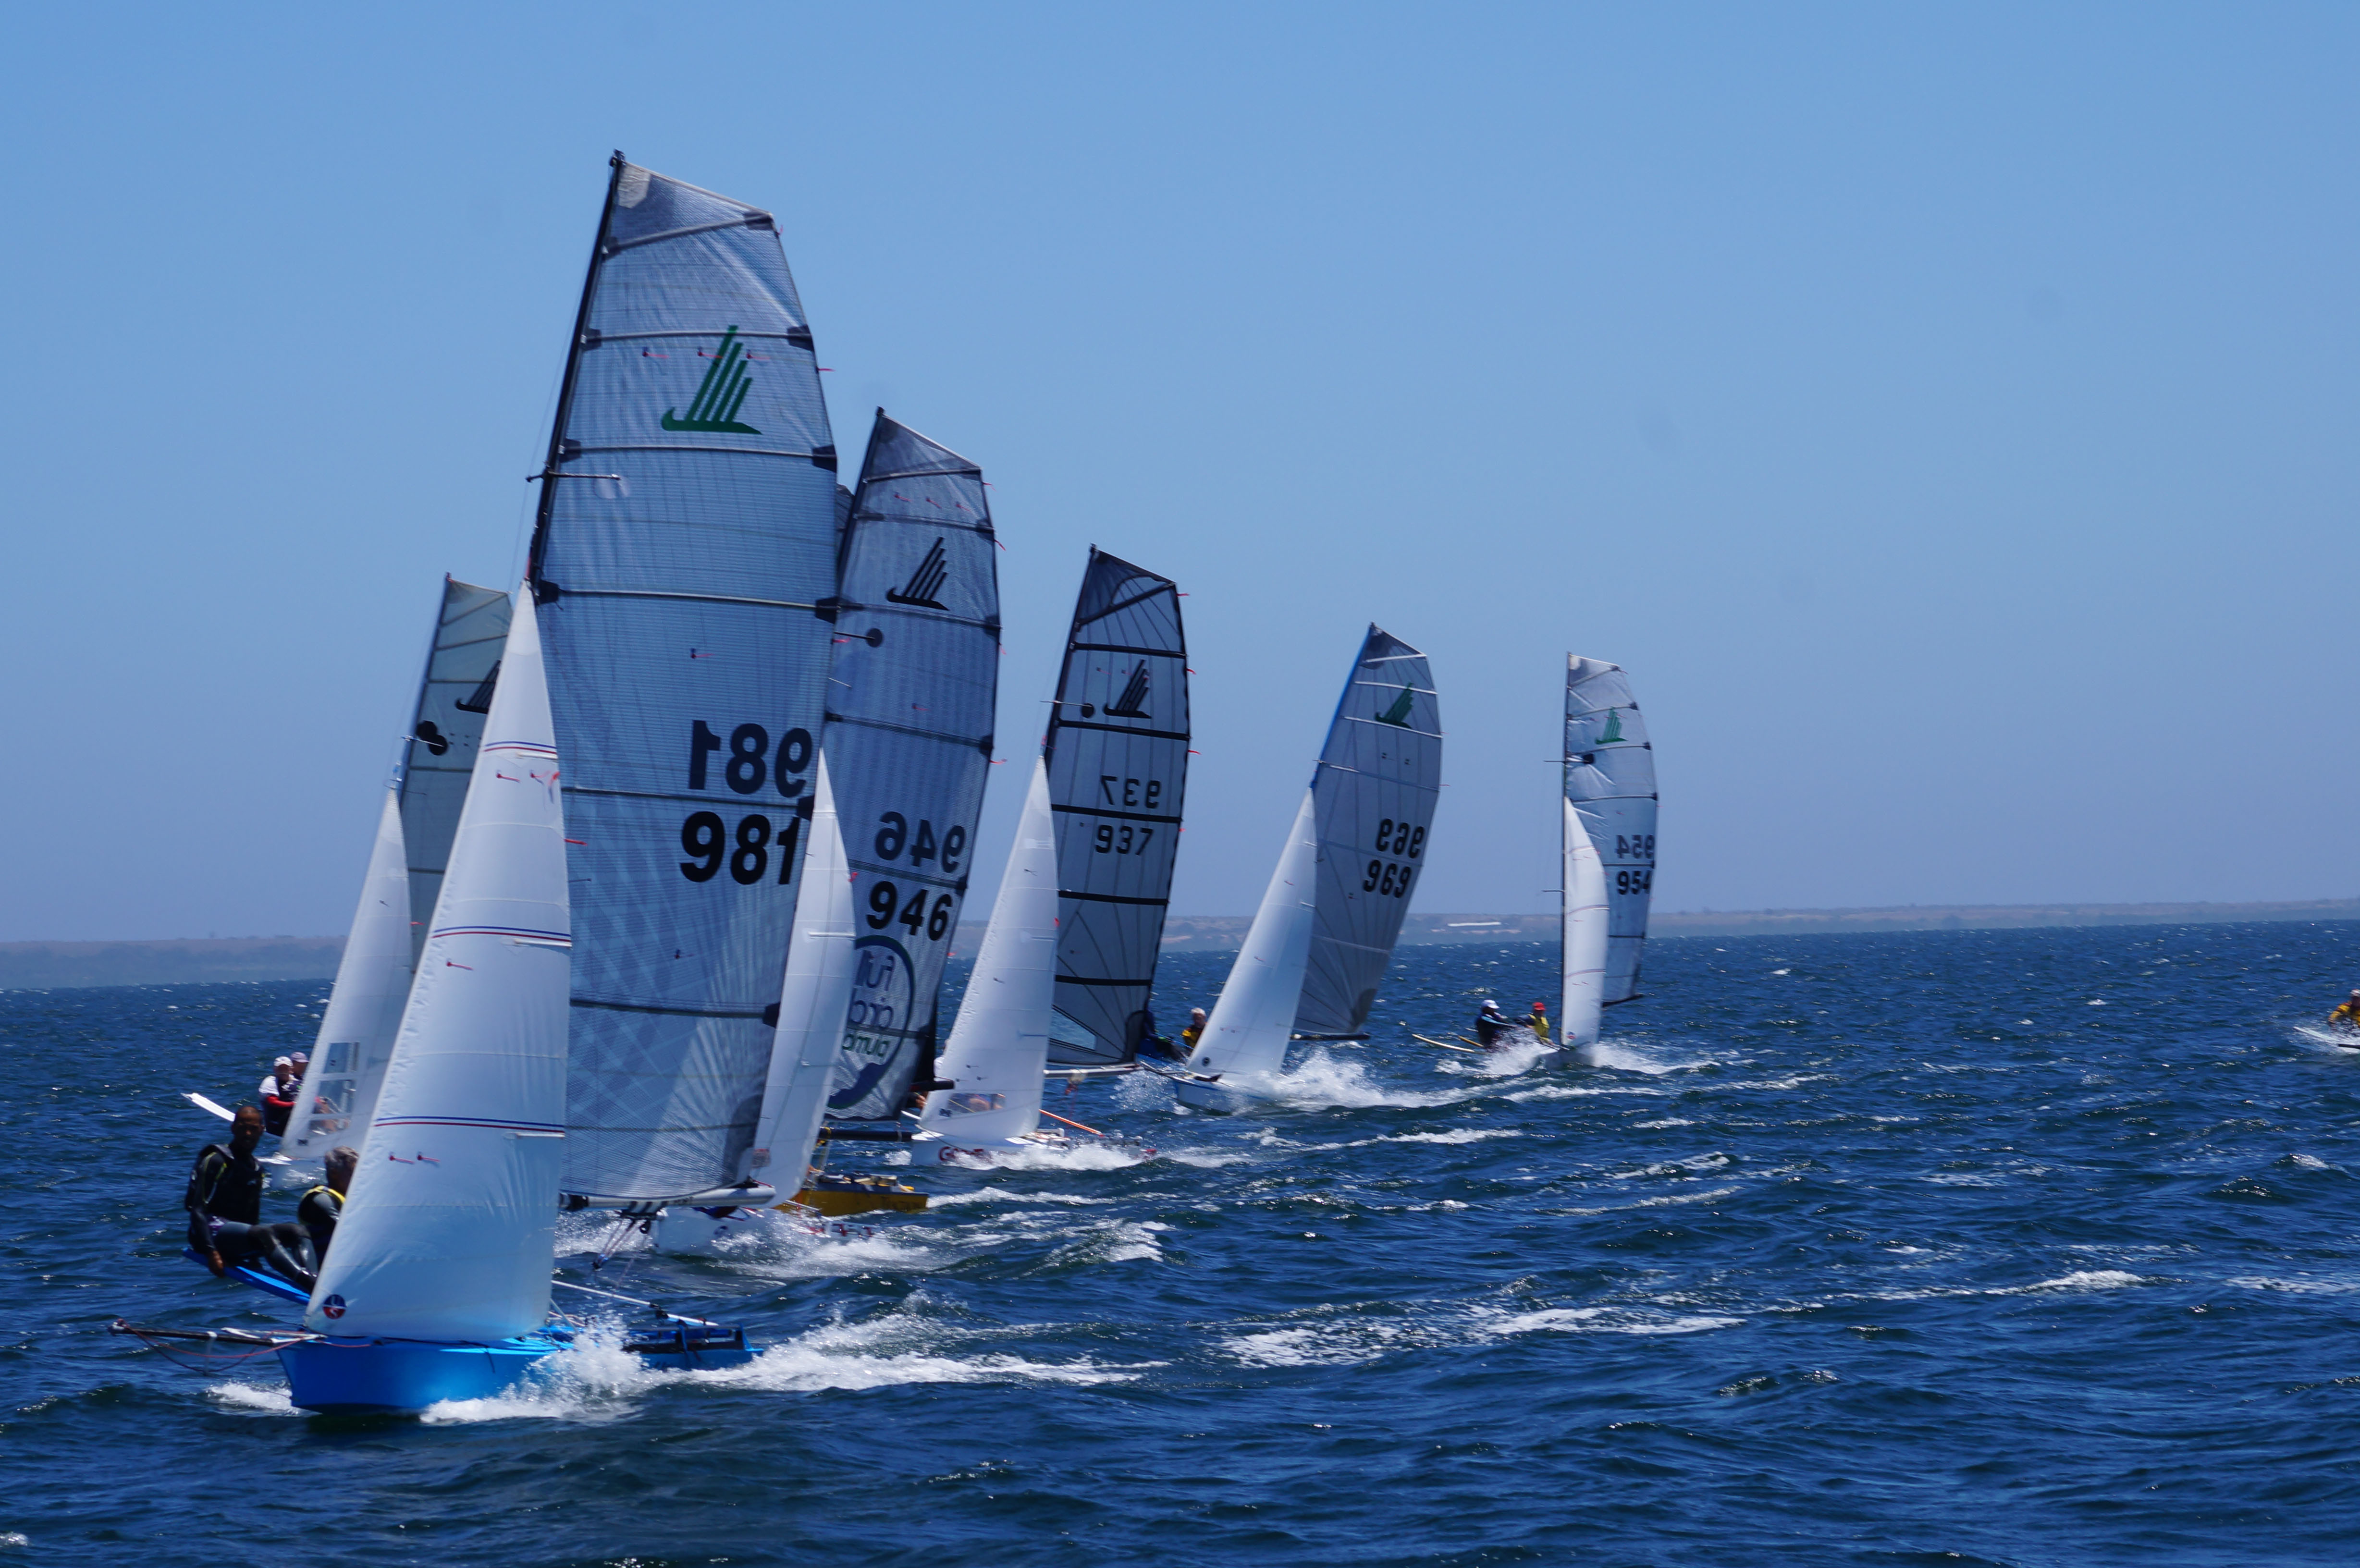 The fleet has been close throughout all the racing during the Skate Nationals.